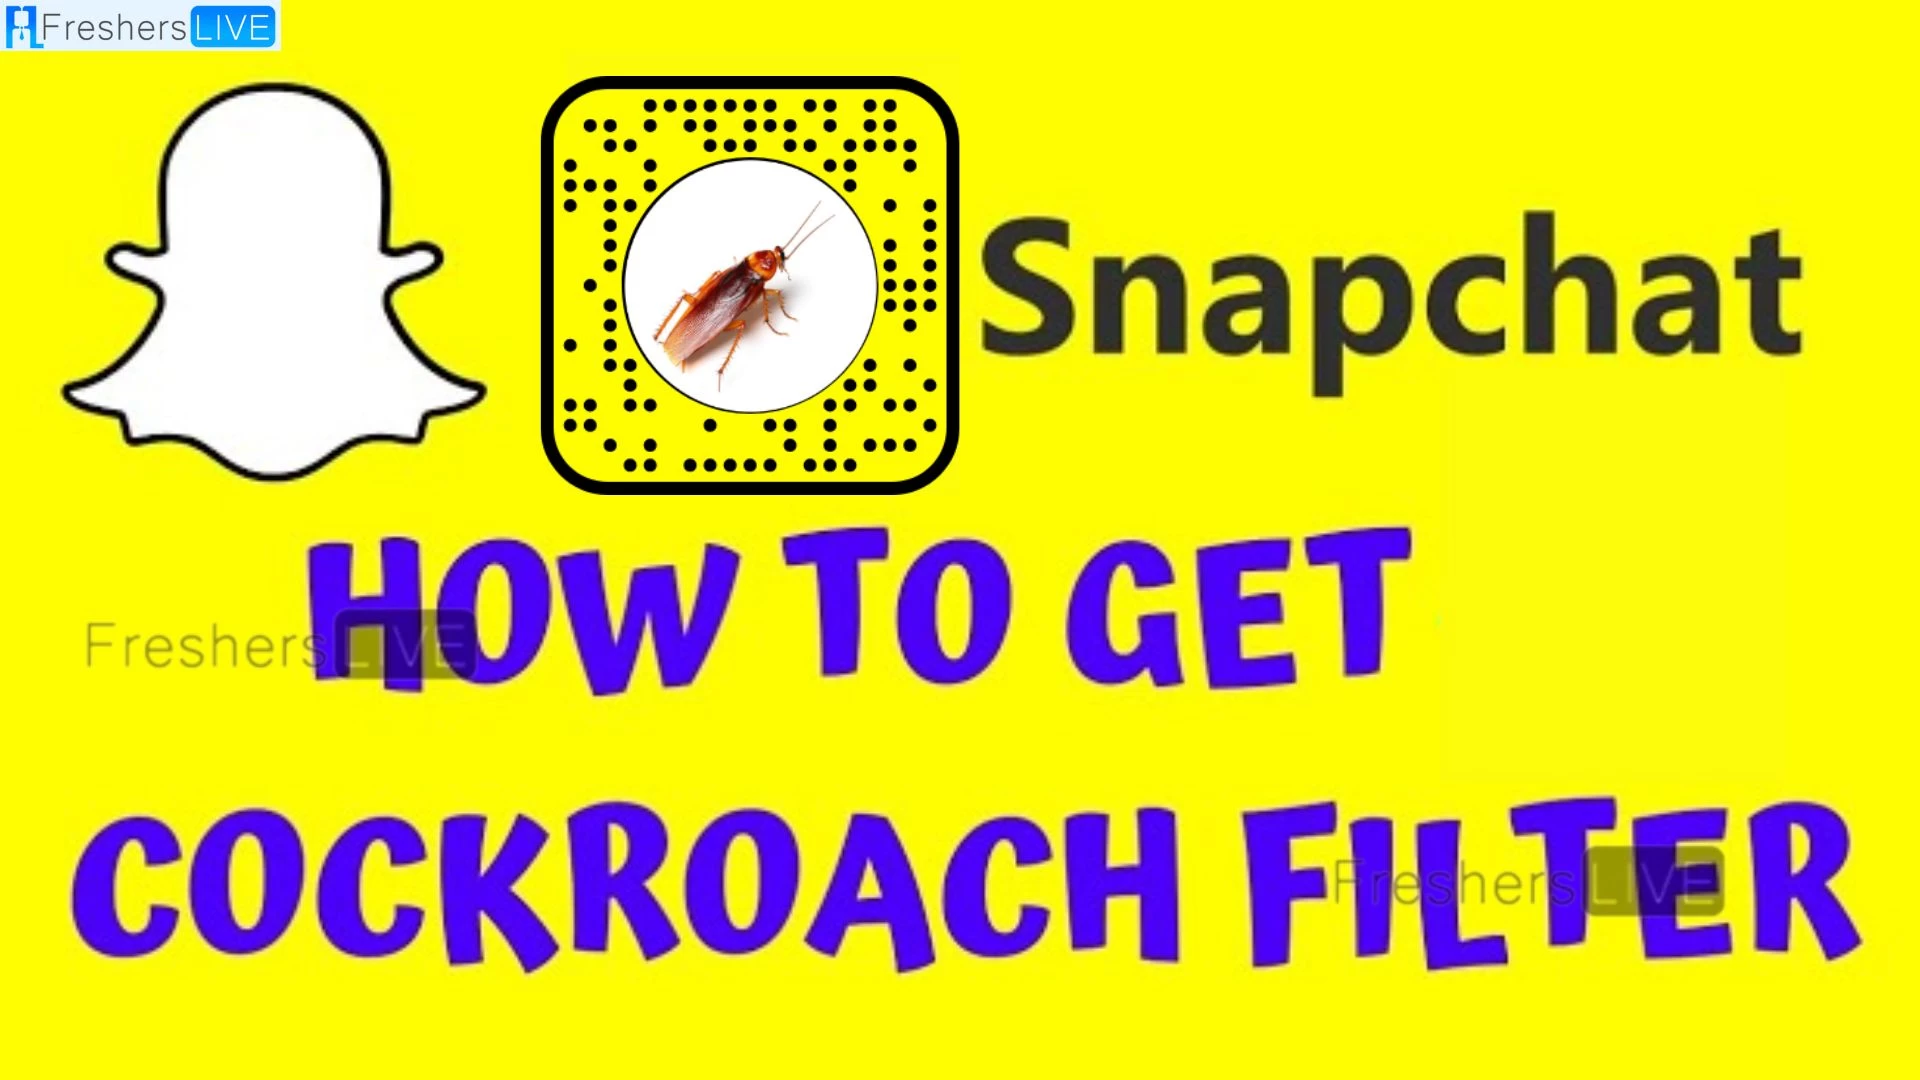 Cockroach Filter Snapchat How to Get Cockroach Filter on Snapchat?